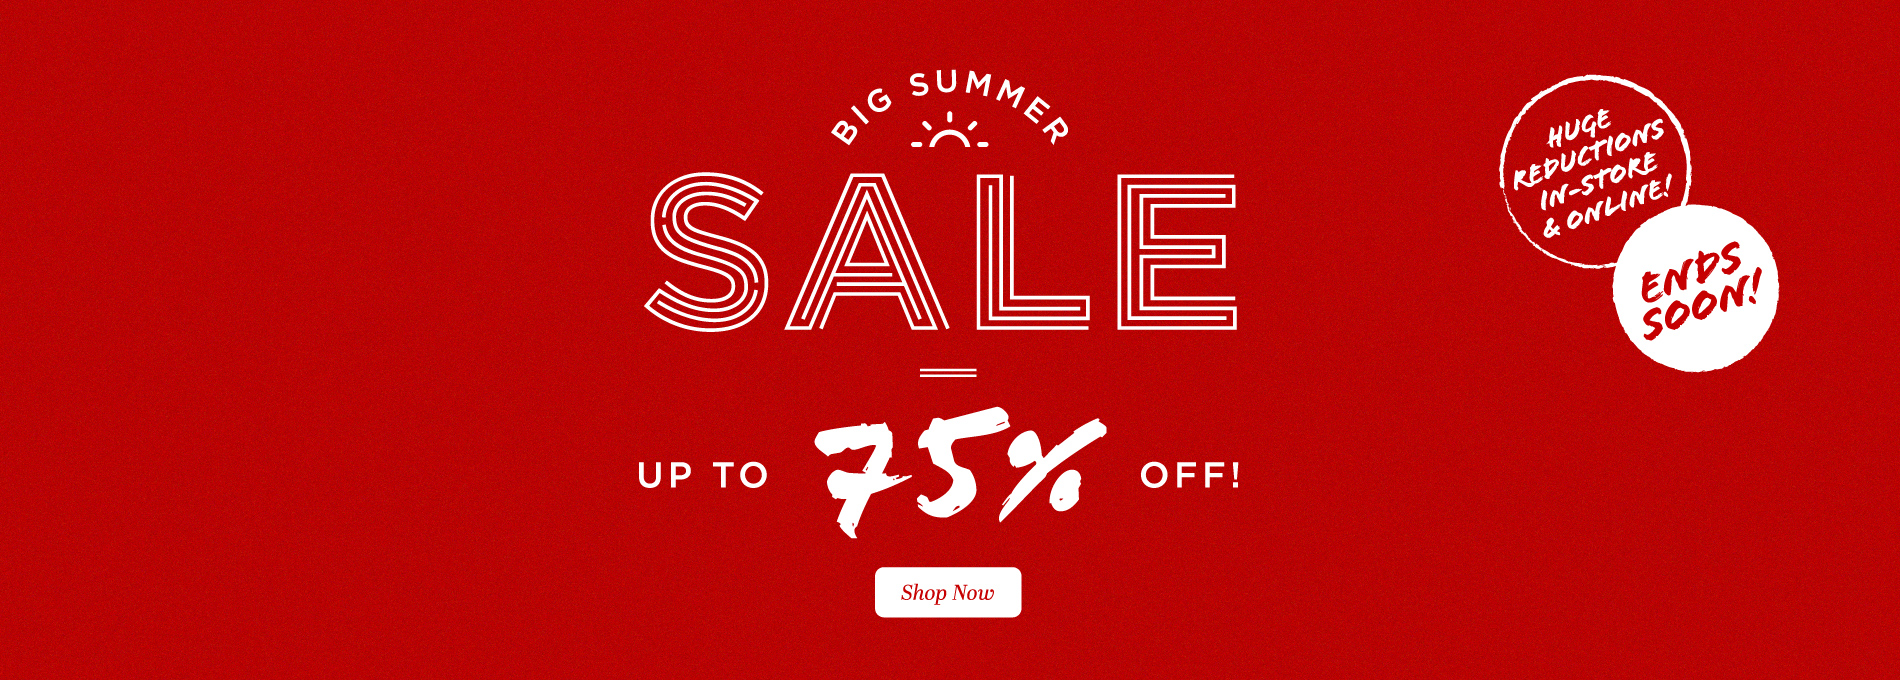 Suit Direct: Summer Sale up to 75% off